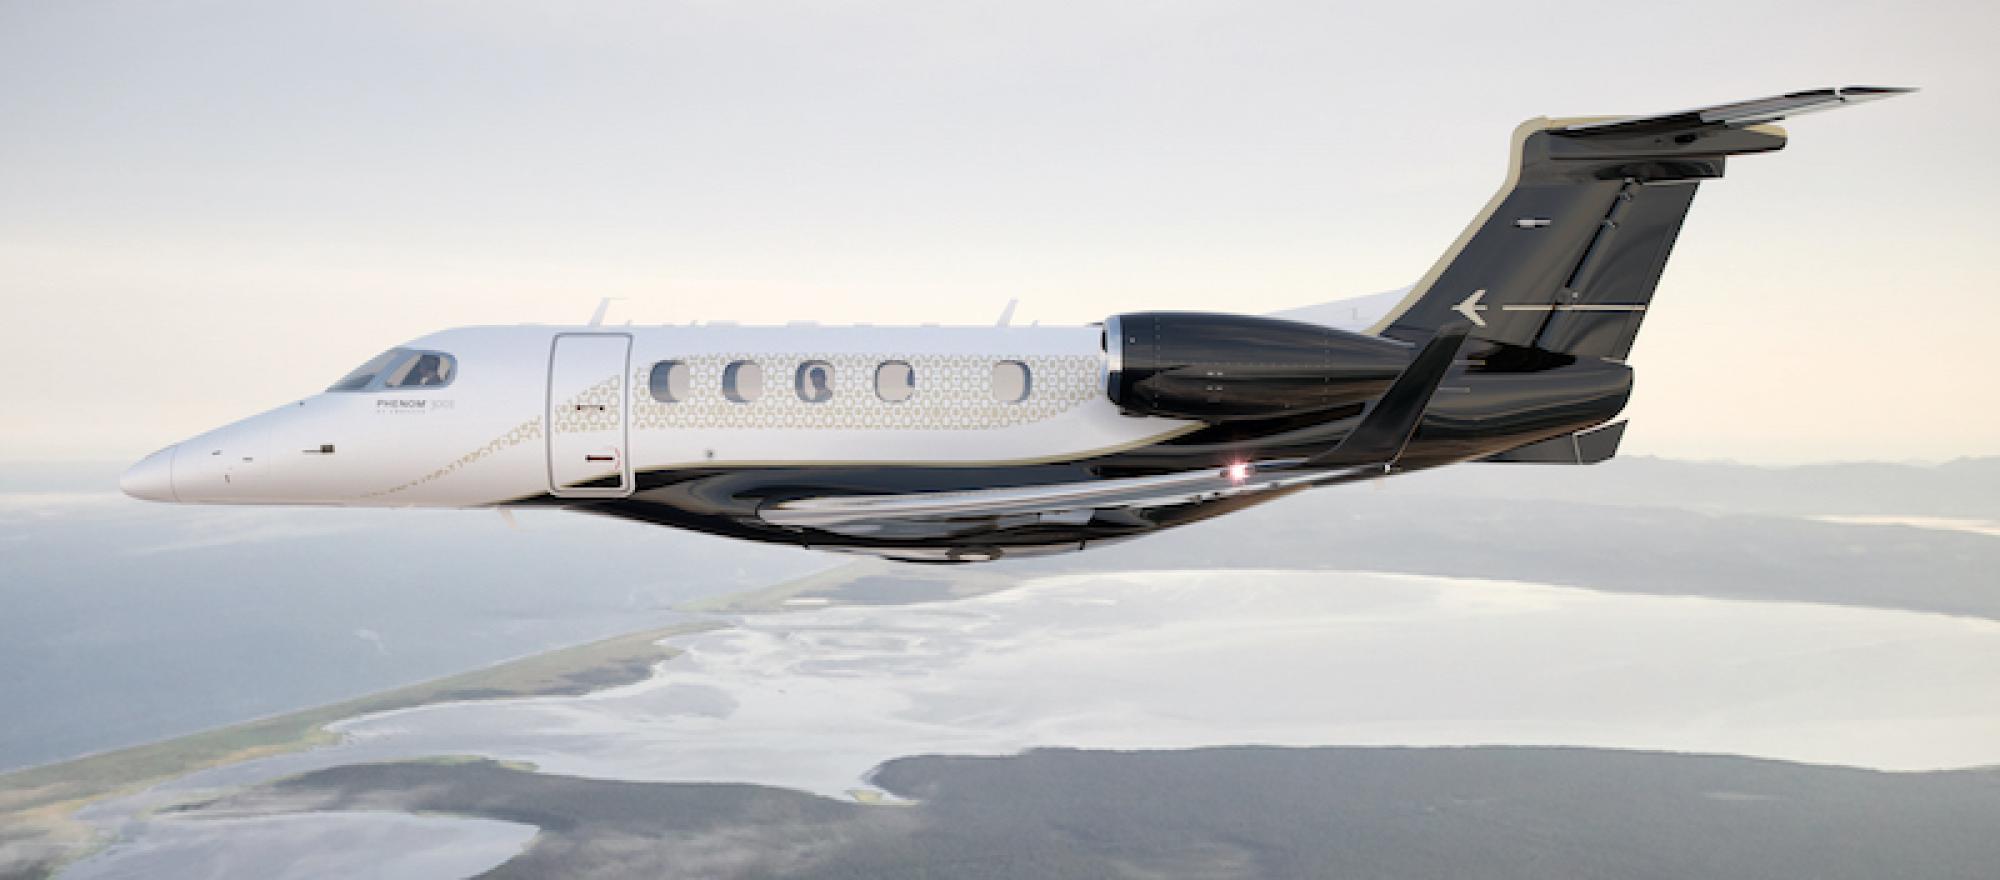 The upgraded Embraer Phenom 300E will come standard with additional speed and range, a quieter cabin, and more capable avionics. Deliveries are set to begin in May 2020. (Photo: Embraer Executive Jets)